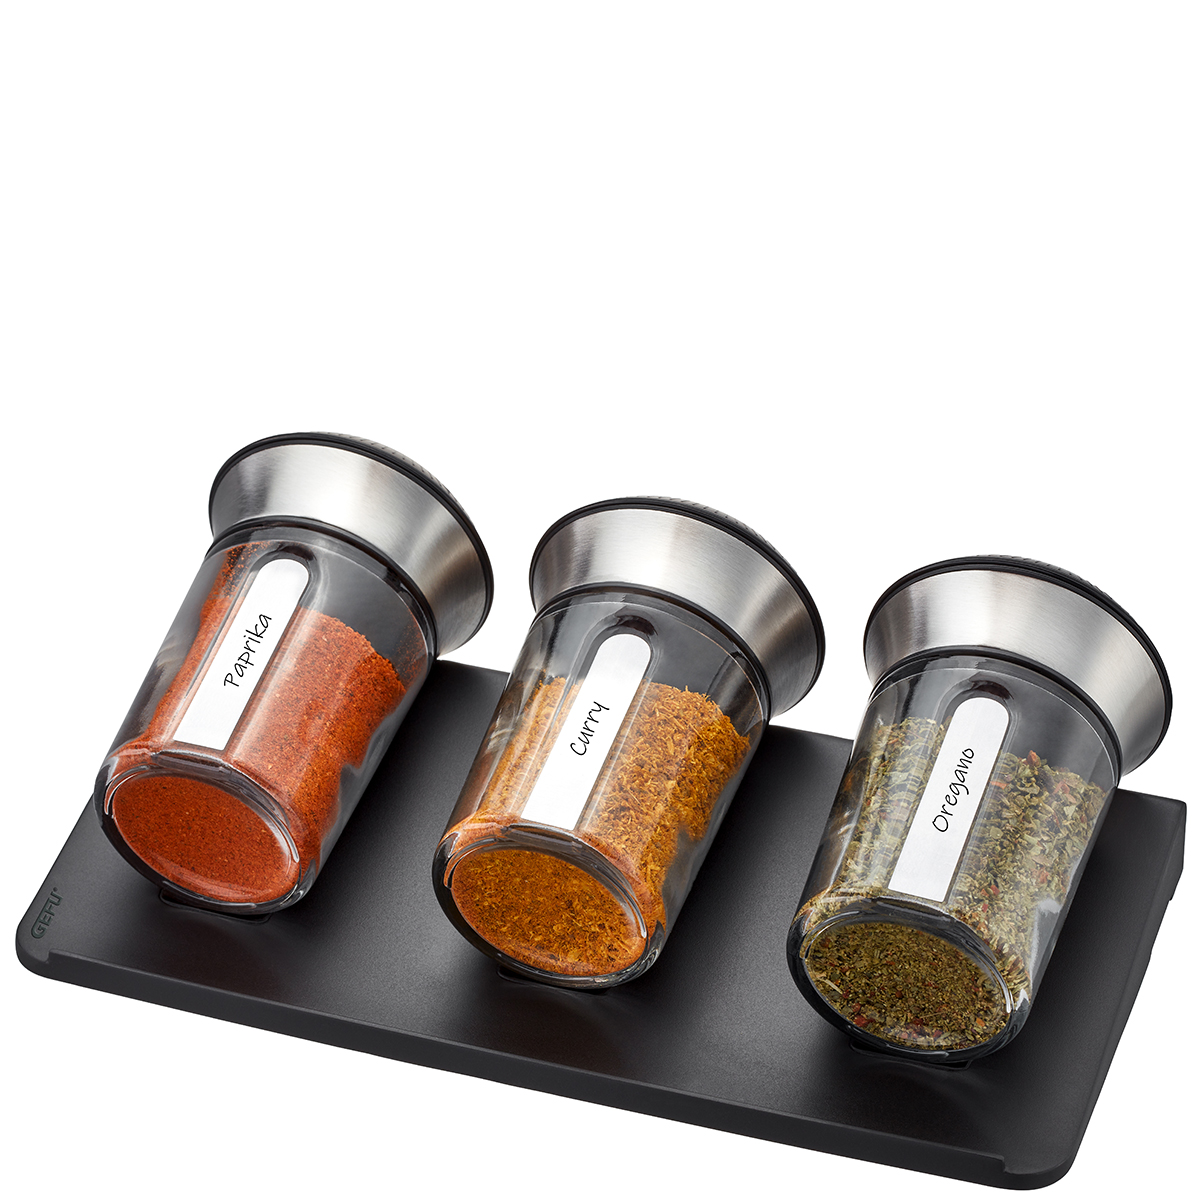 Set: 3 Spice and herb shaker X-PLOSION® + Spice and herb shaker organiser X-PLOSION®